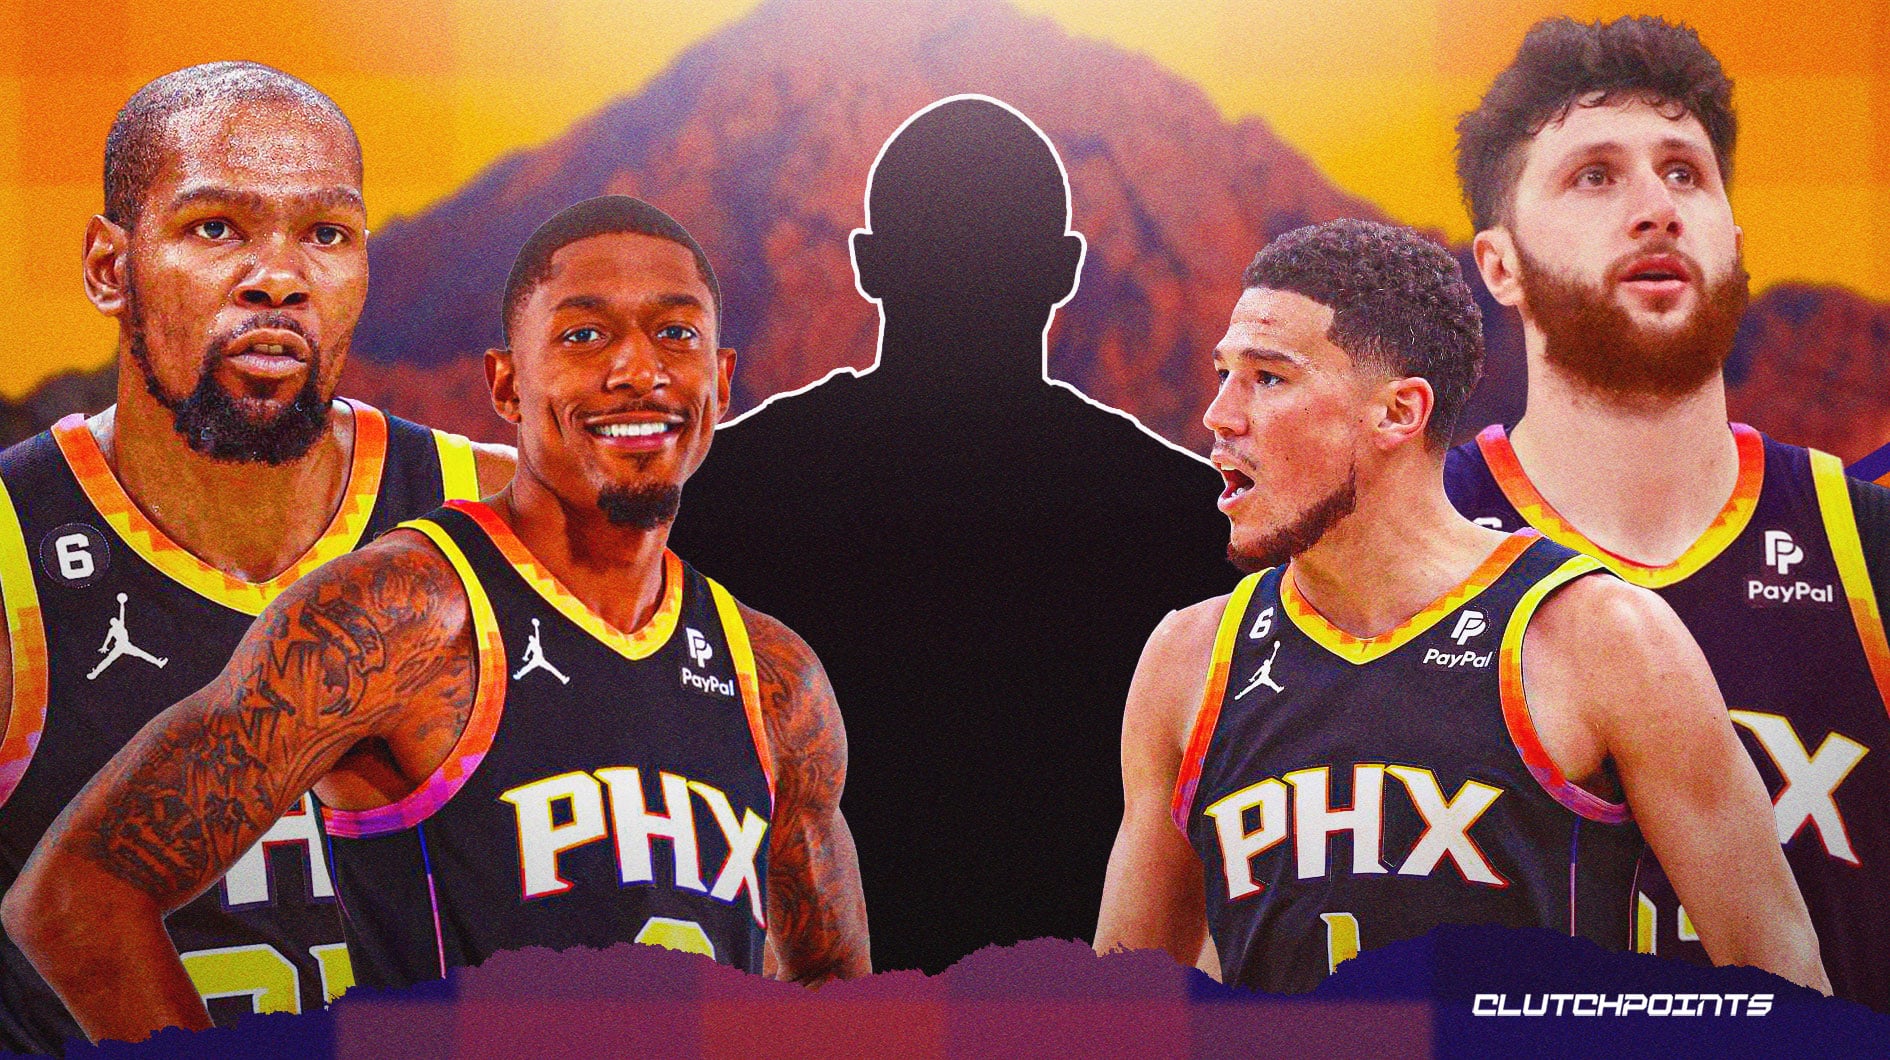 PHNX Suns on X: The Suns will look different with Jusuf Nurkic at